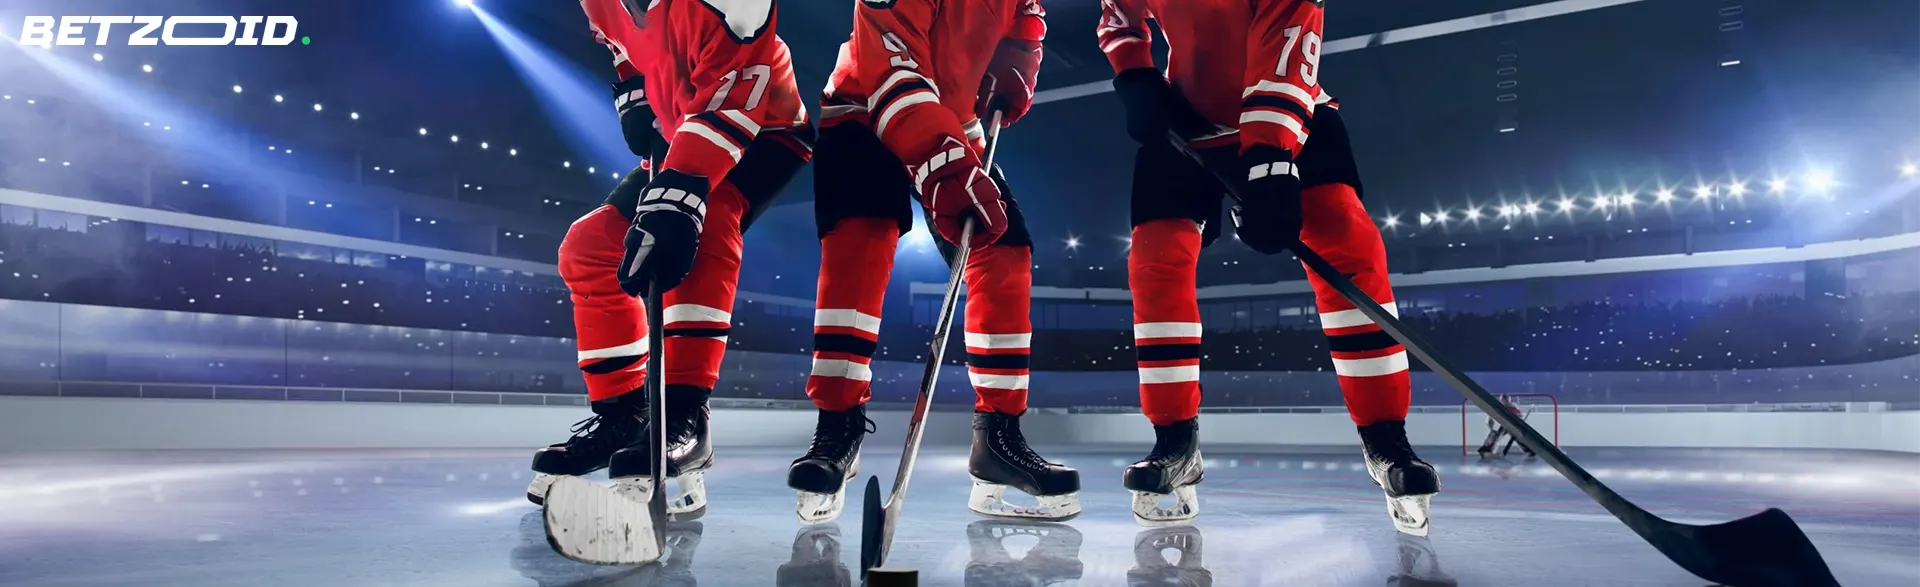 Hockey players in red uniforms on an ice rink, representing the best NHL betting site in Canada.